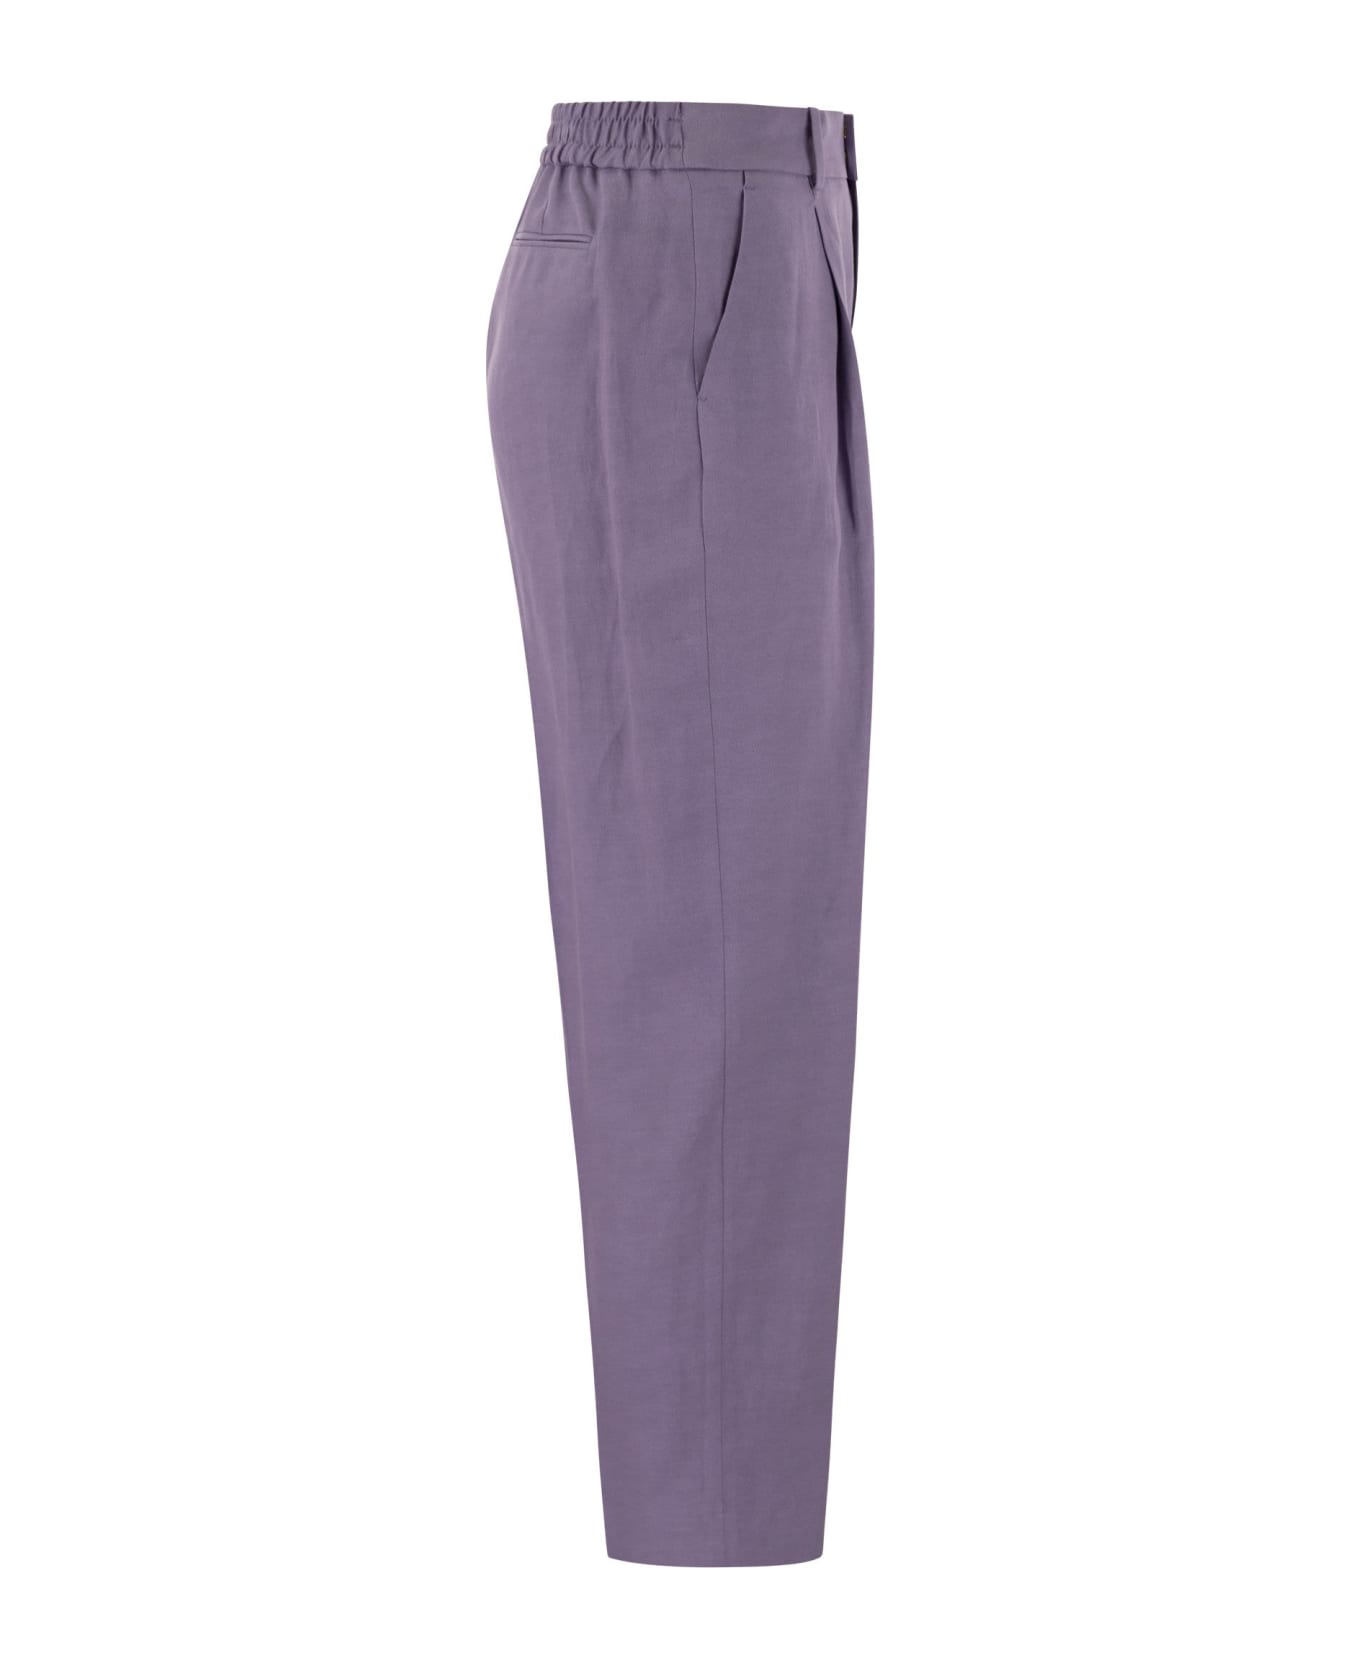 PT Torino Daisy - Viscose And Linen Trousers - Lilac ボトムス